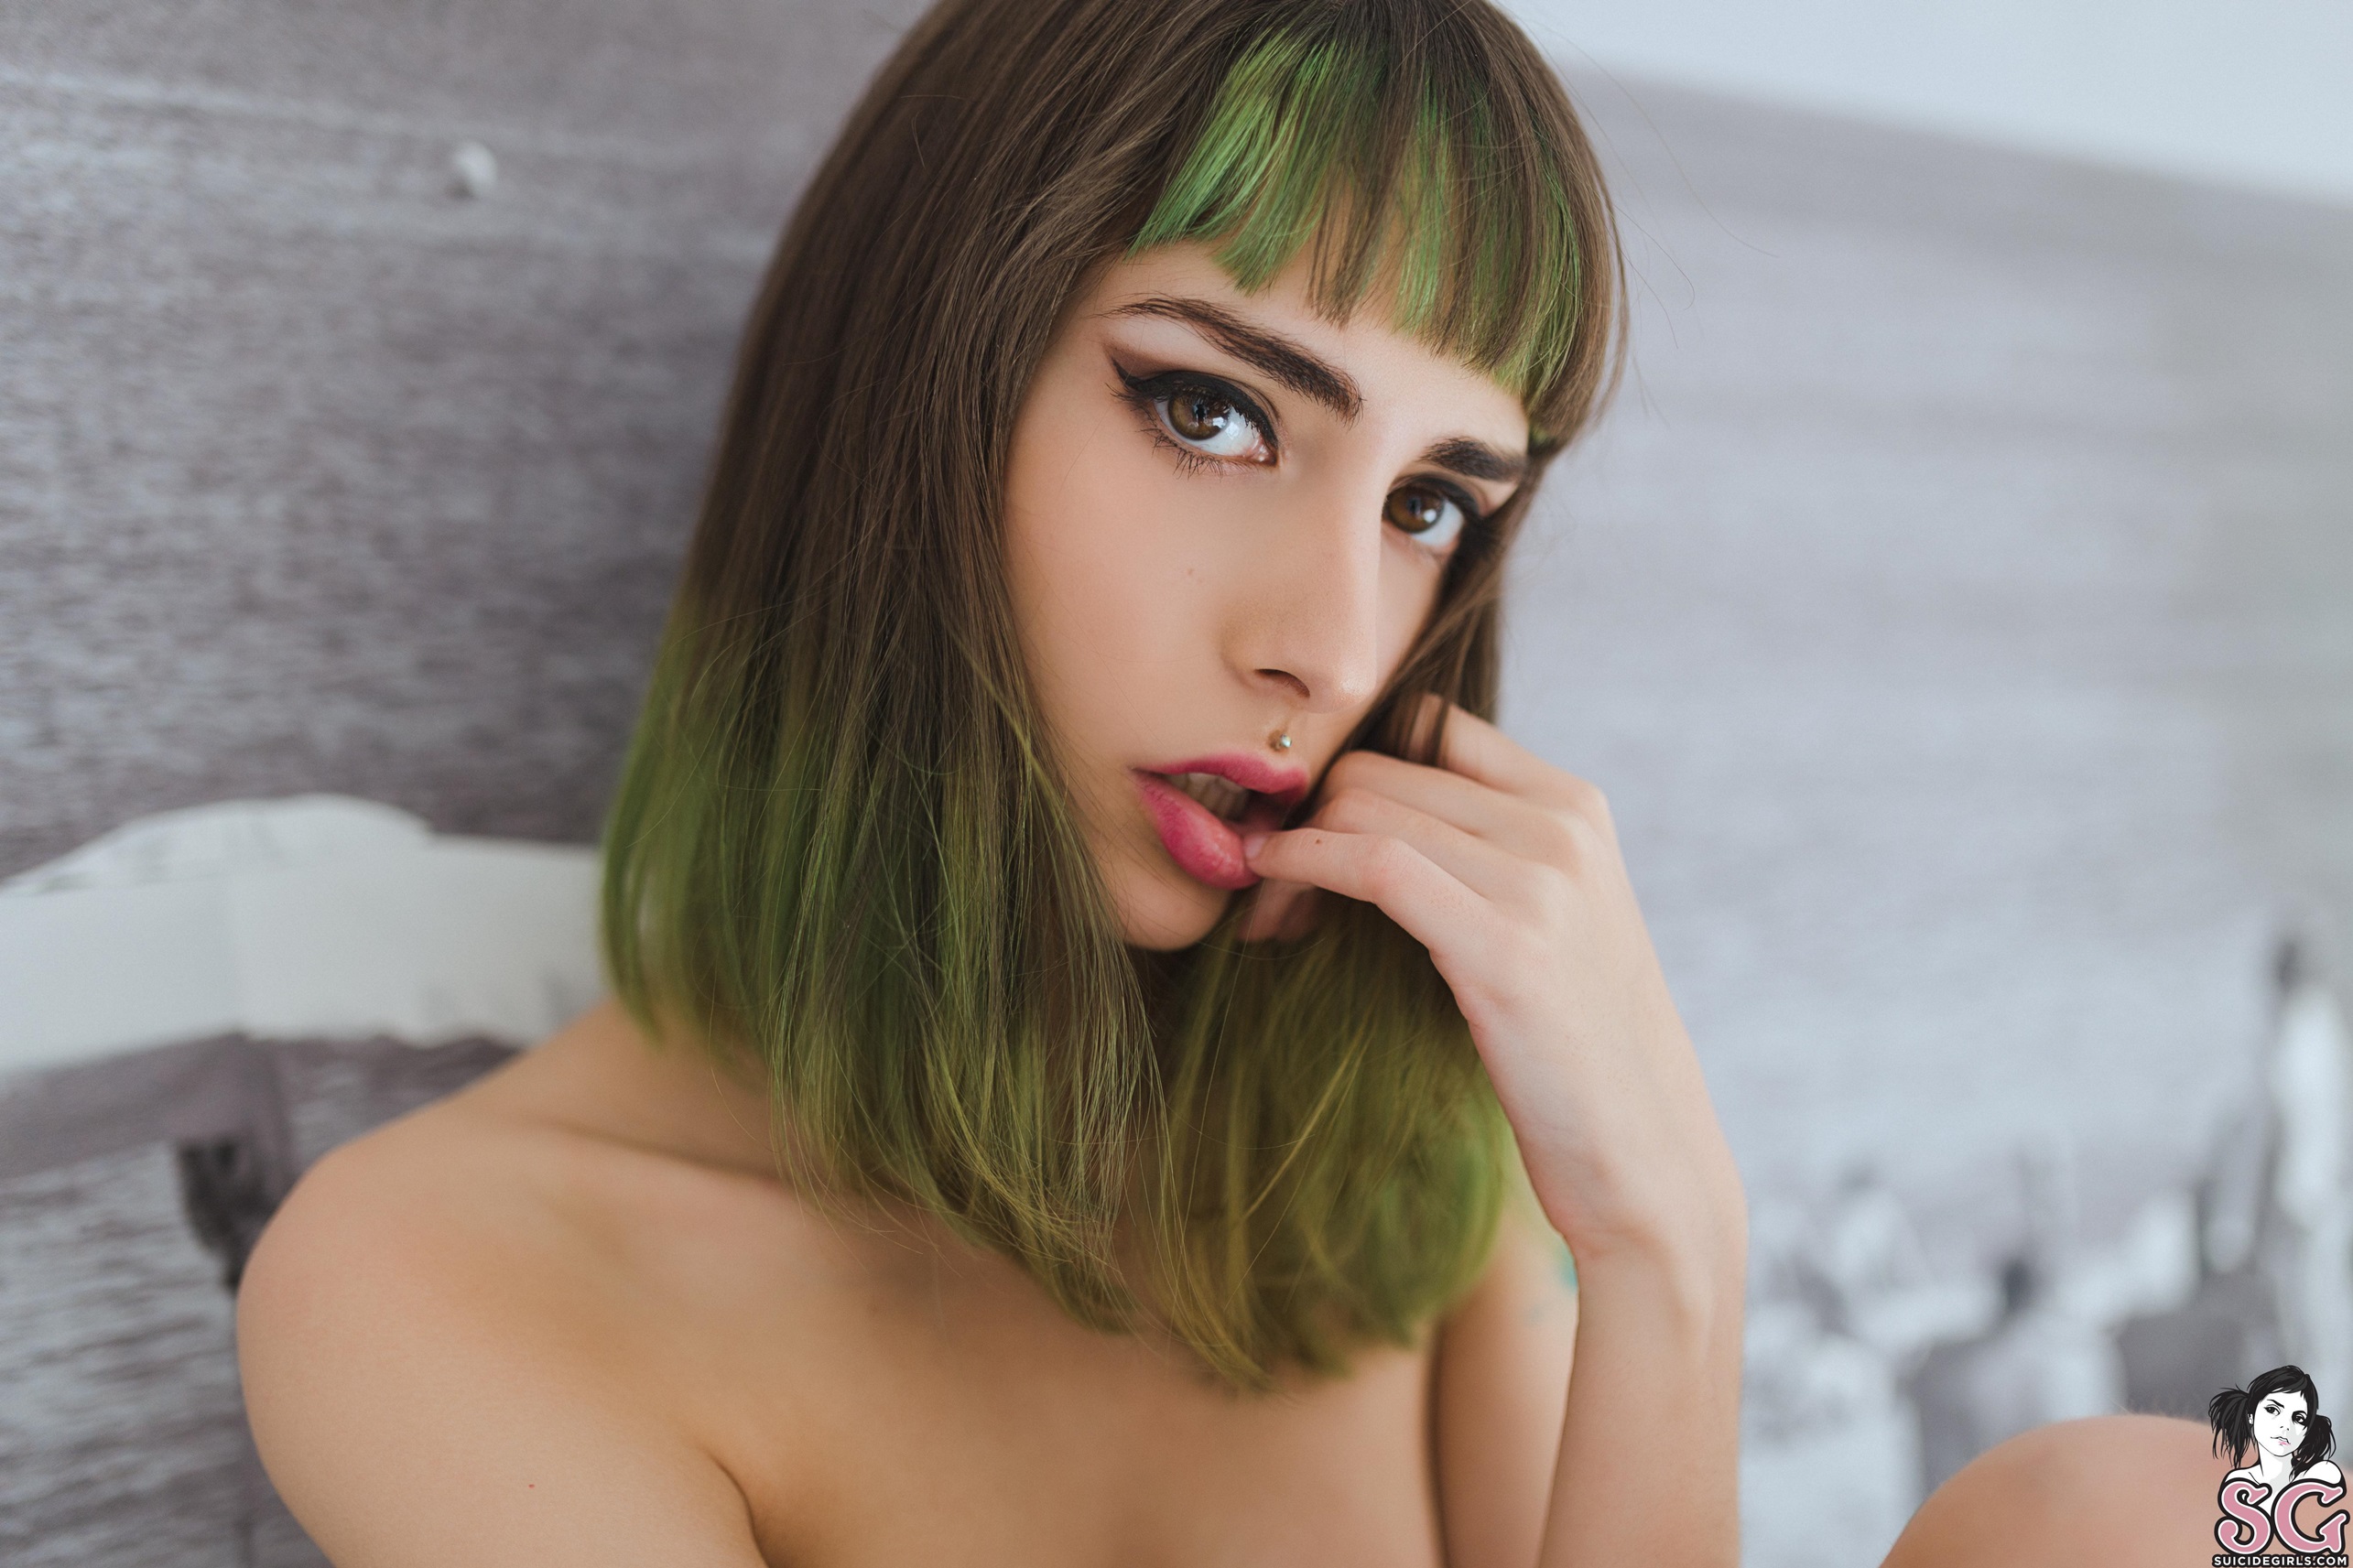 People 2570x1713 Marshmallow Suicide model Suicide Girls women indoors women face dyed hair piercing bare shoulders closeup watermarked